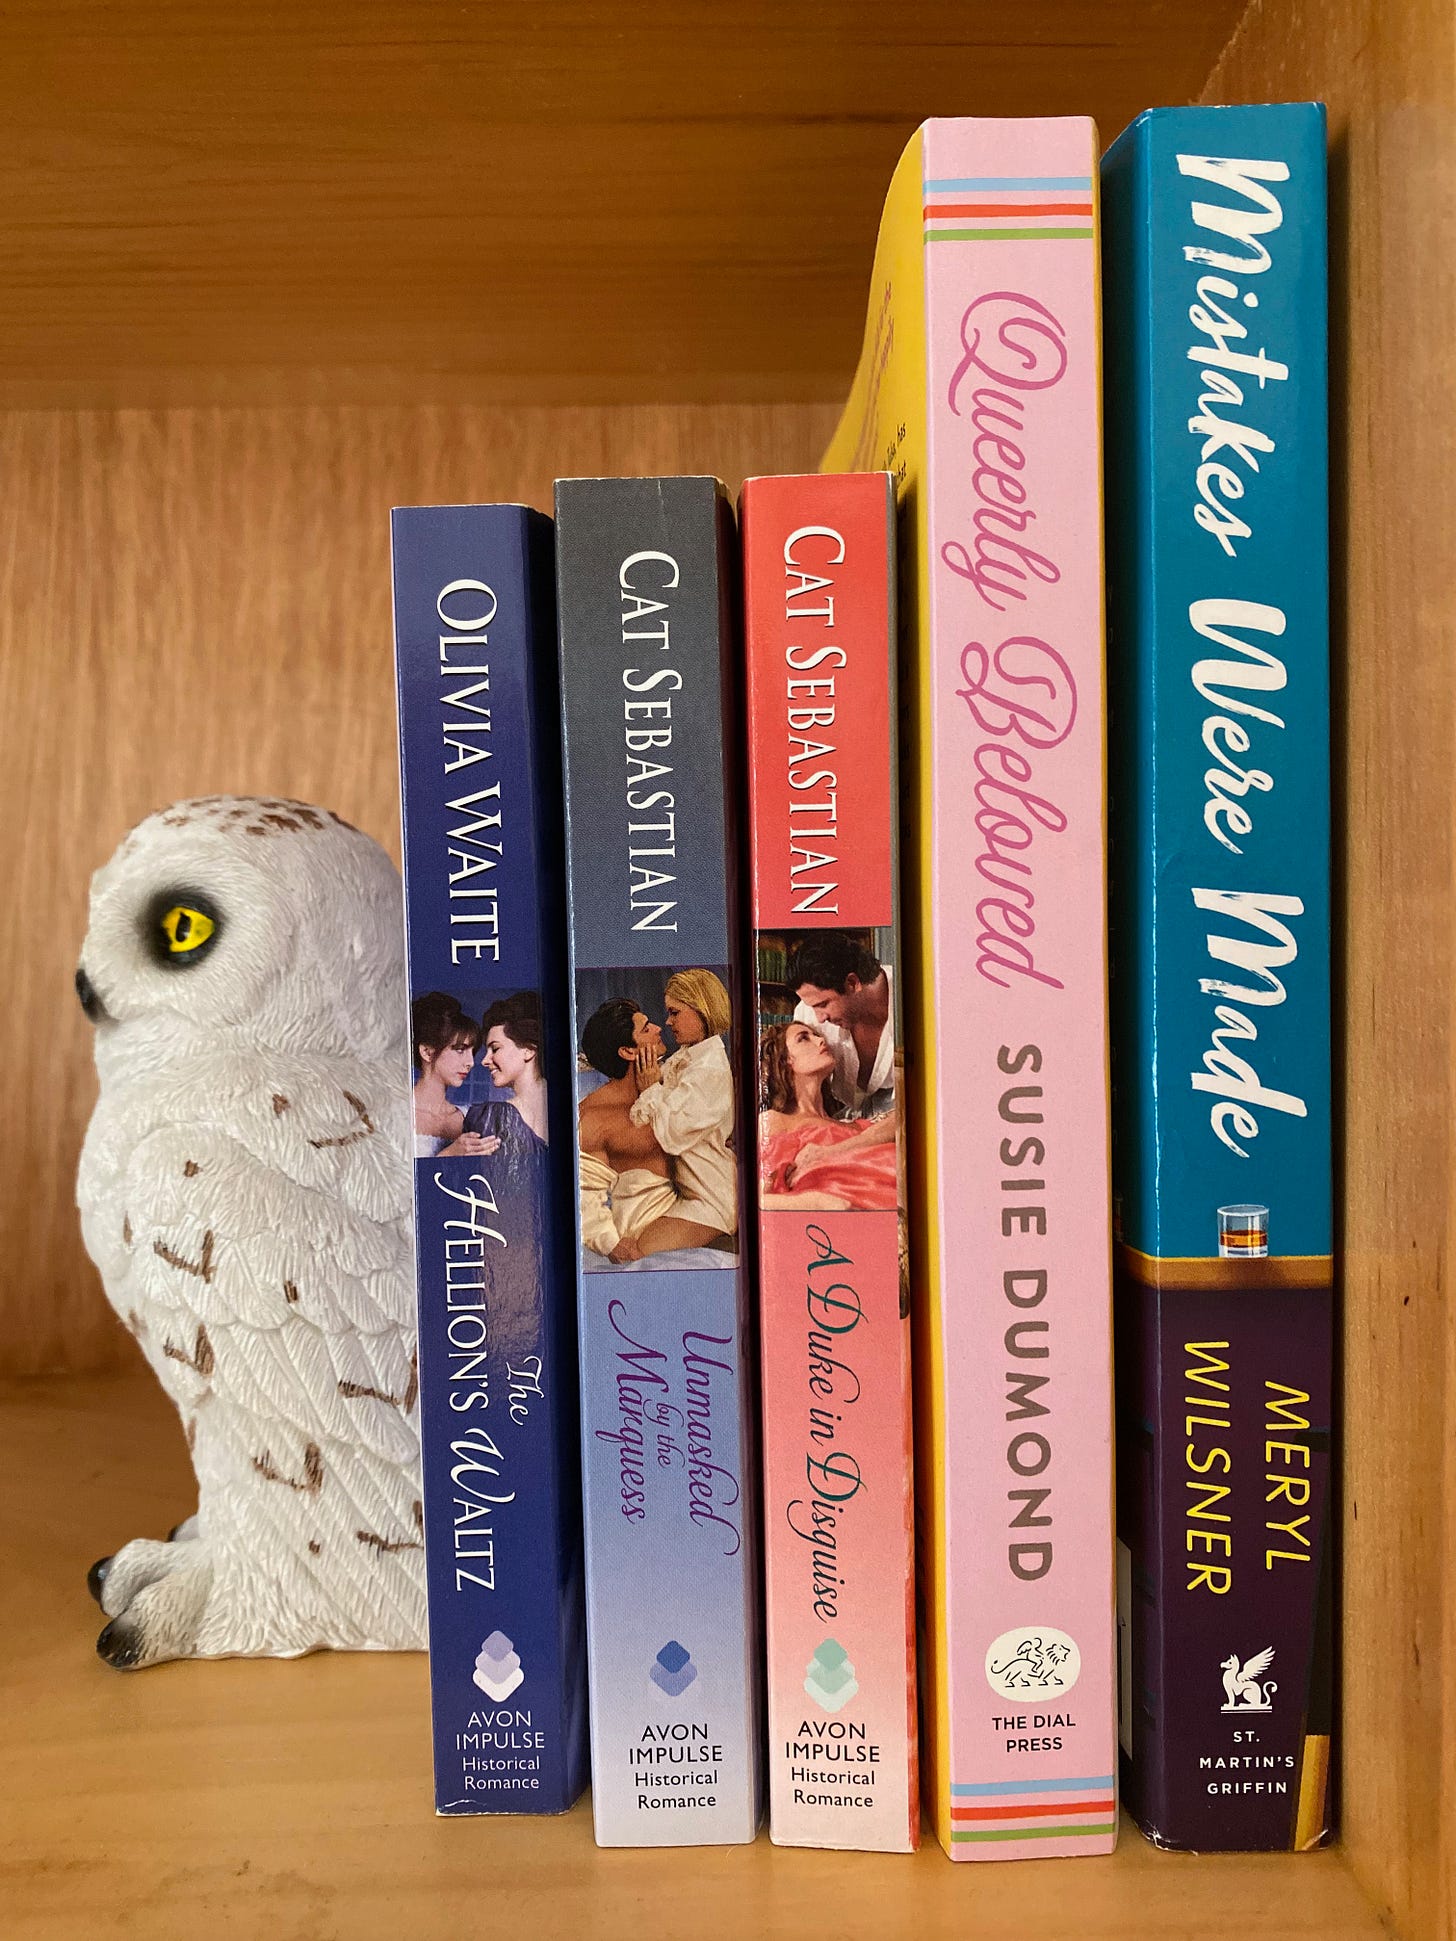 The five listed books on a shelf being supported by a snowy owl bookend.